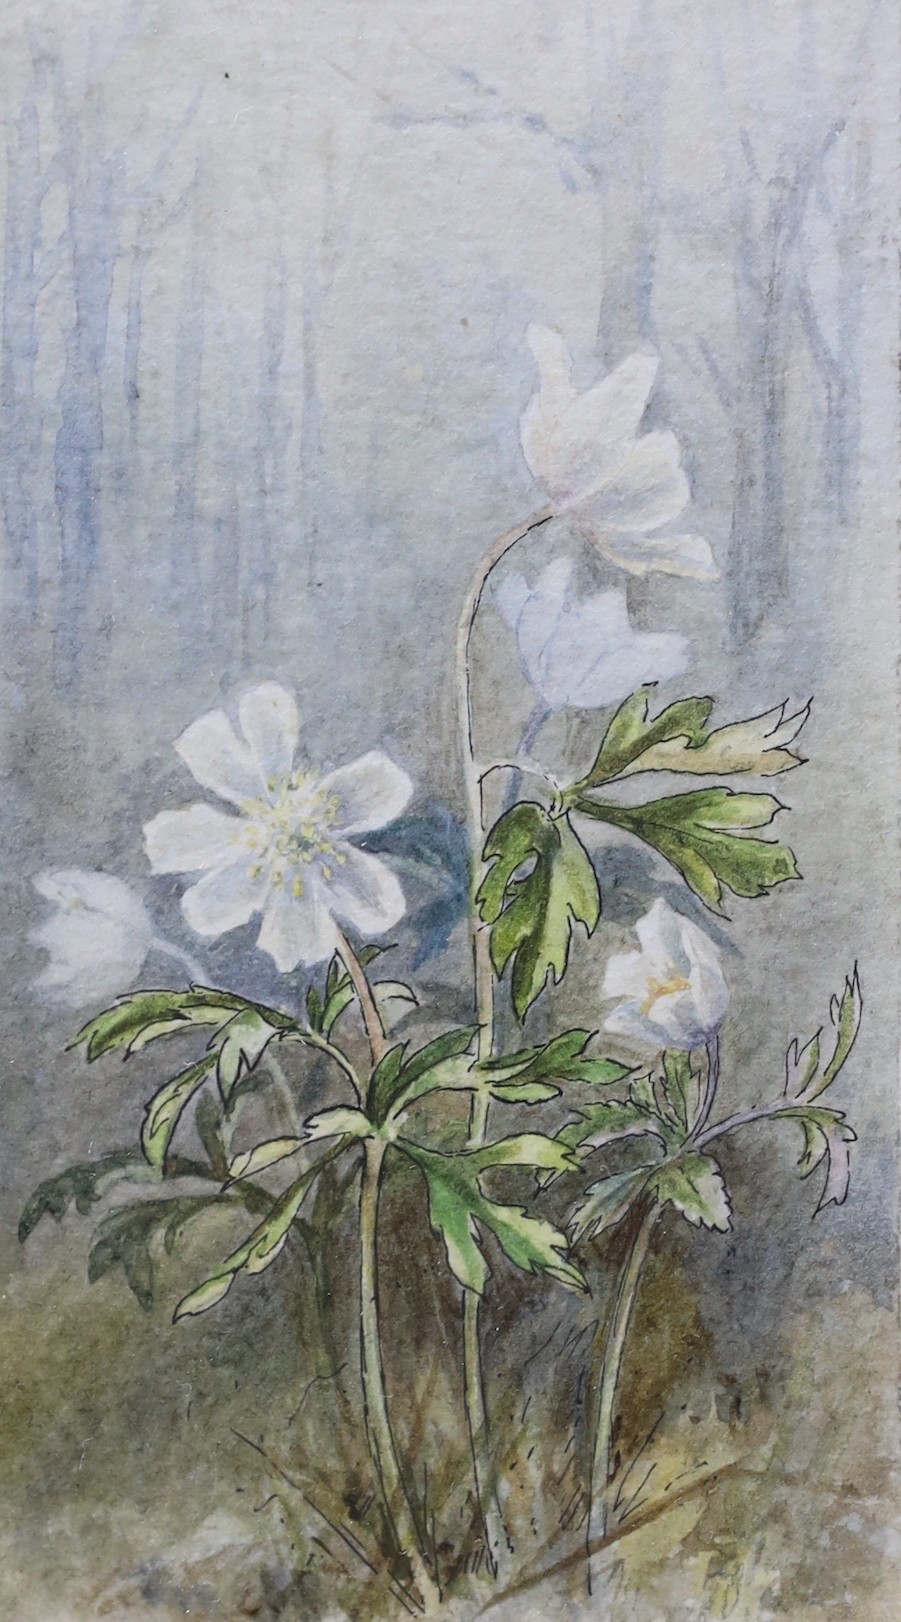 Helen Allingham (1848-1926), two watercolours, Study of a wood anemone and Study of a cuckoo flower, one signed in pencil, 15 x 14cm and 11 x 6cm